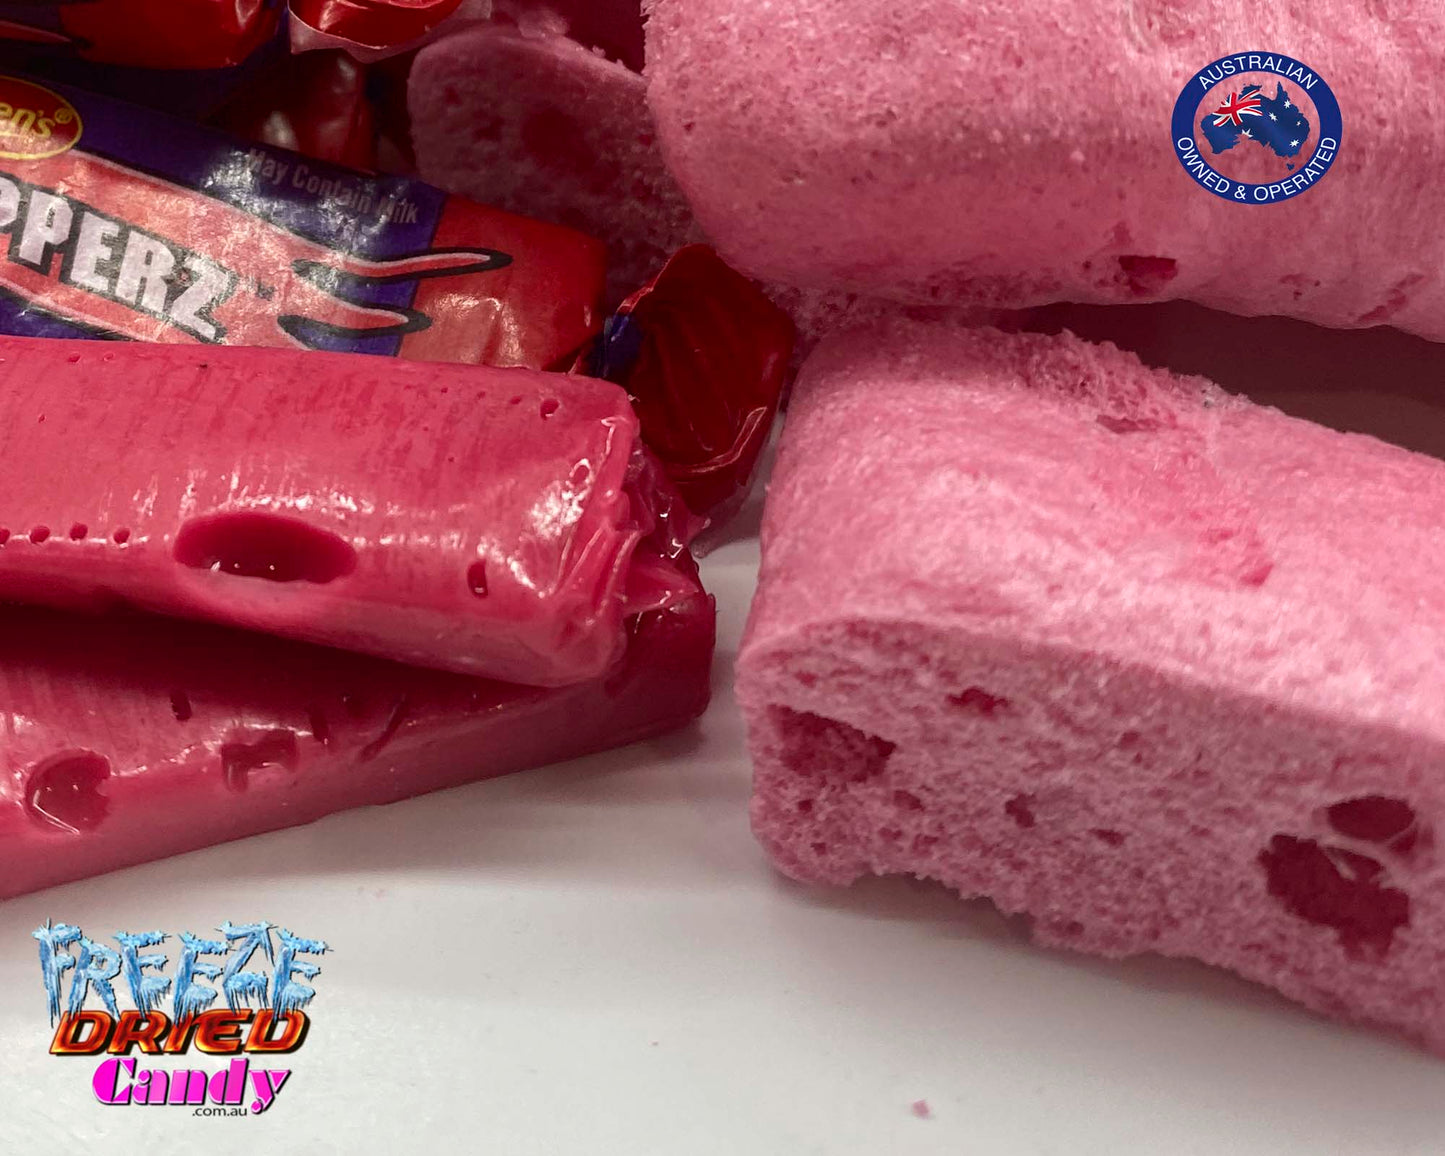 Freeze Dried Red Ripperz - Freeze Dried Candy Lollies Sweets & treats 